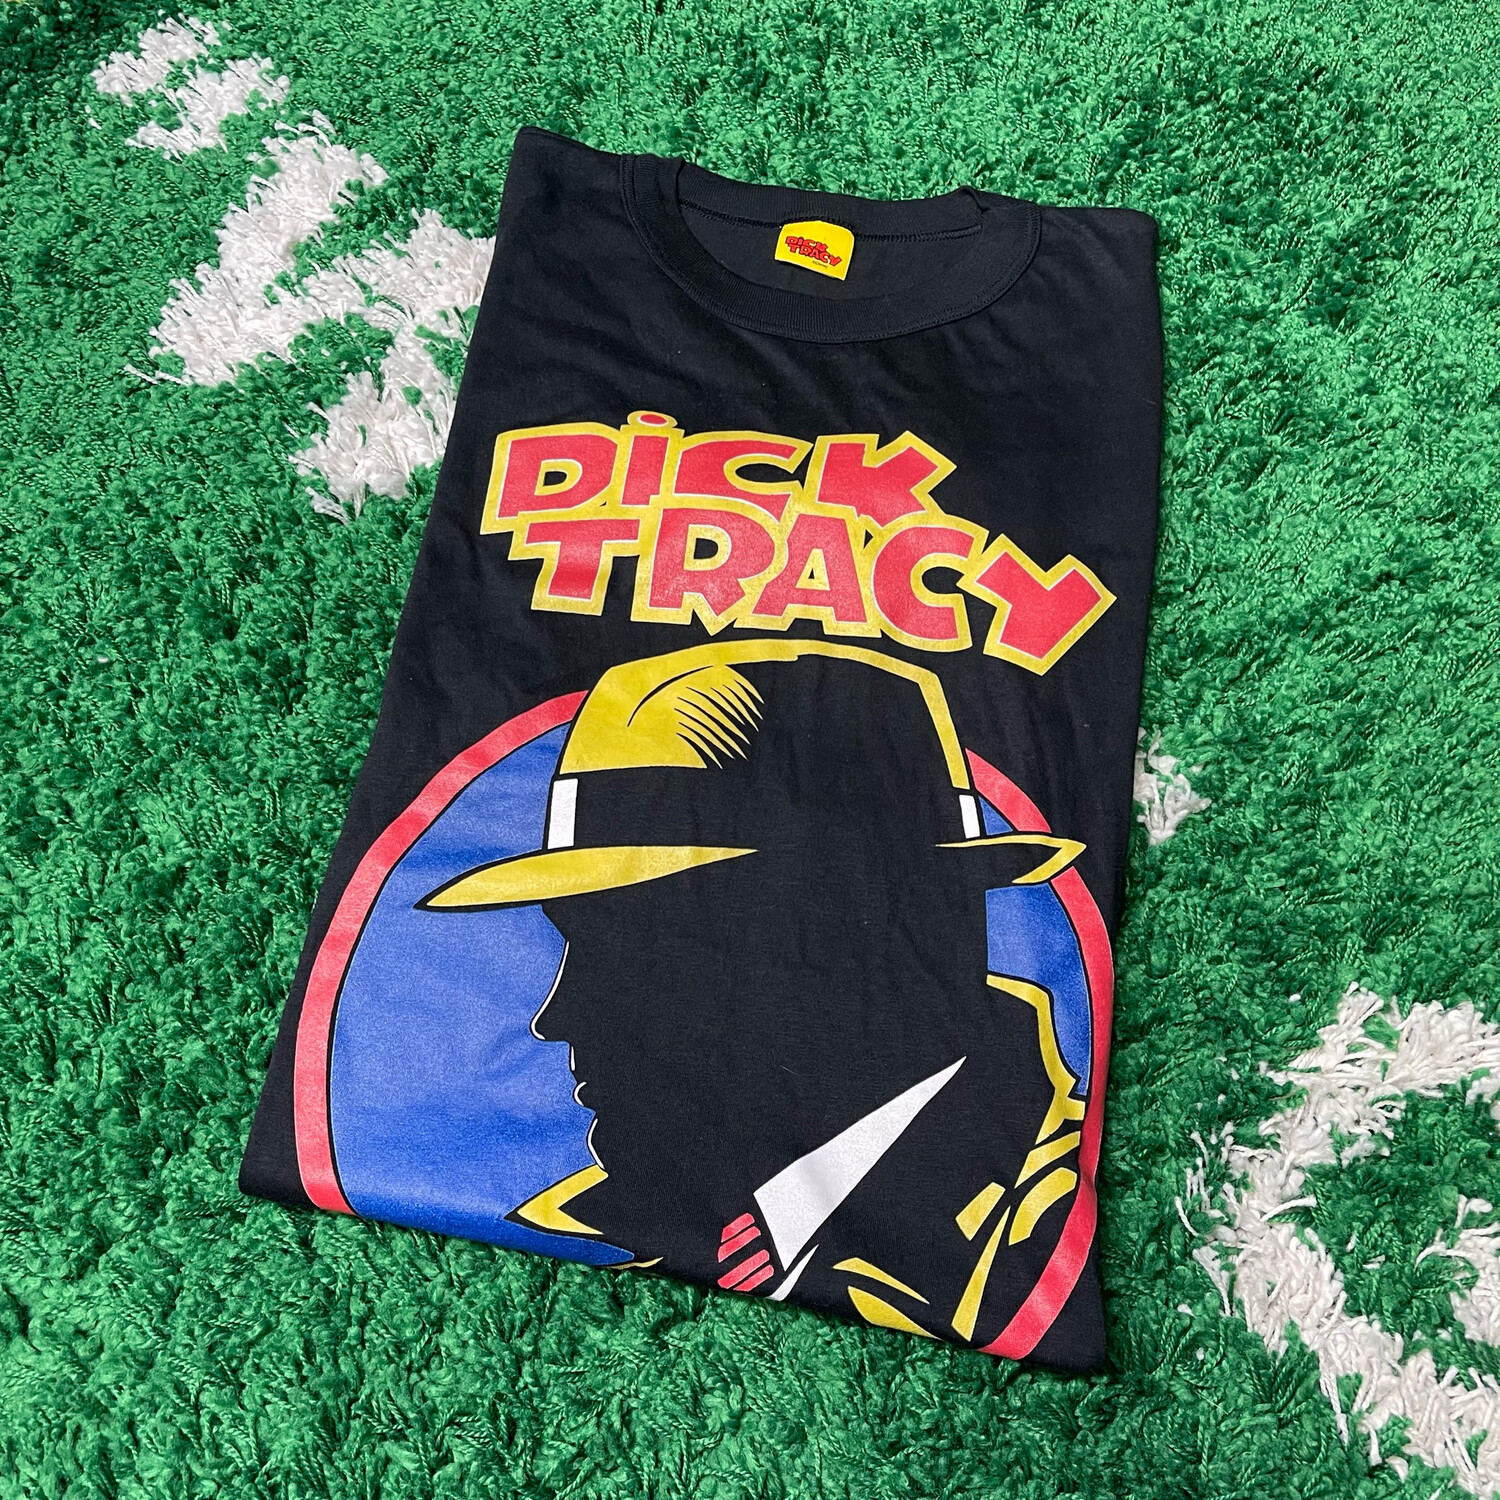 Dick Tracy Black Tee Size Large 